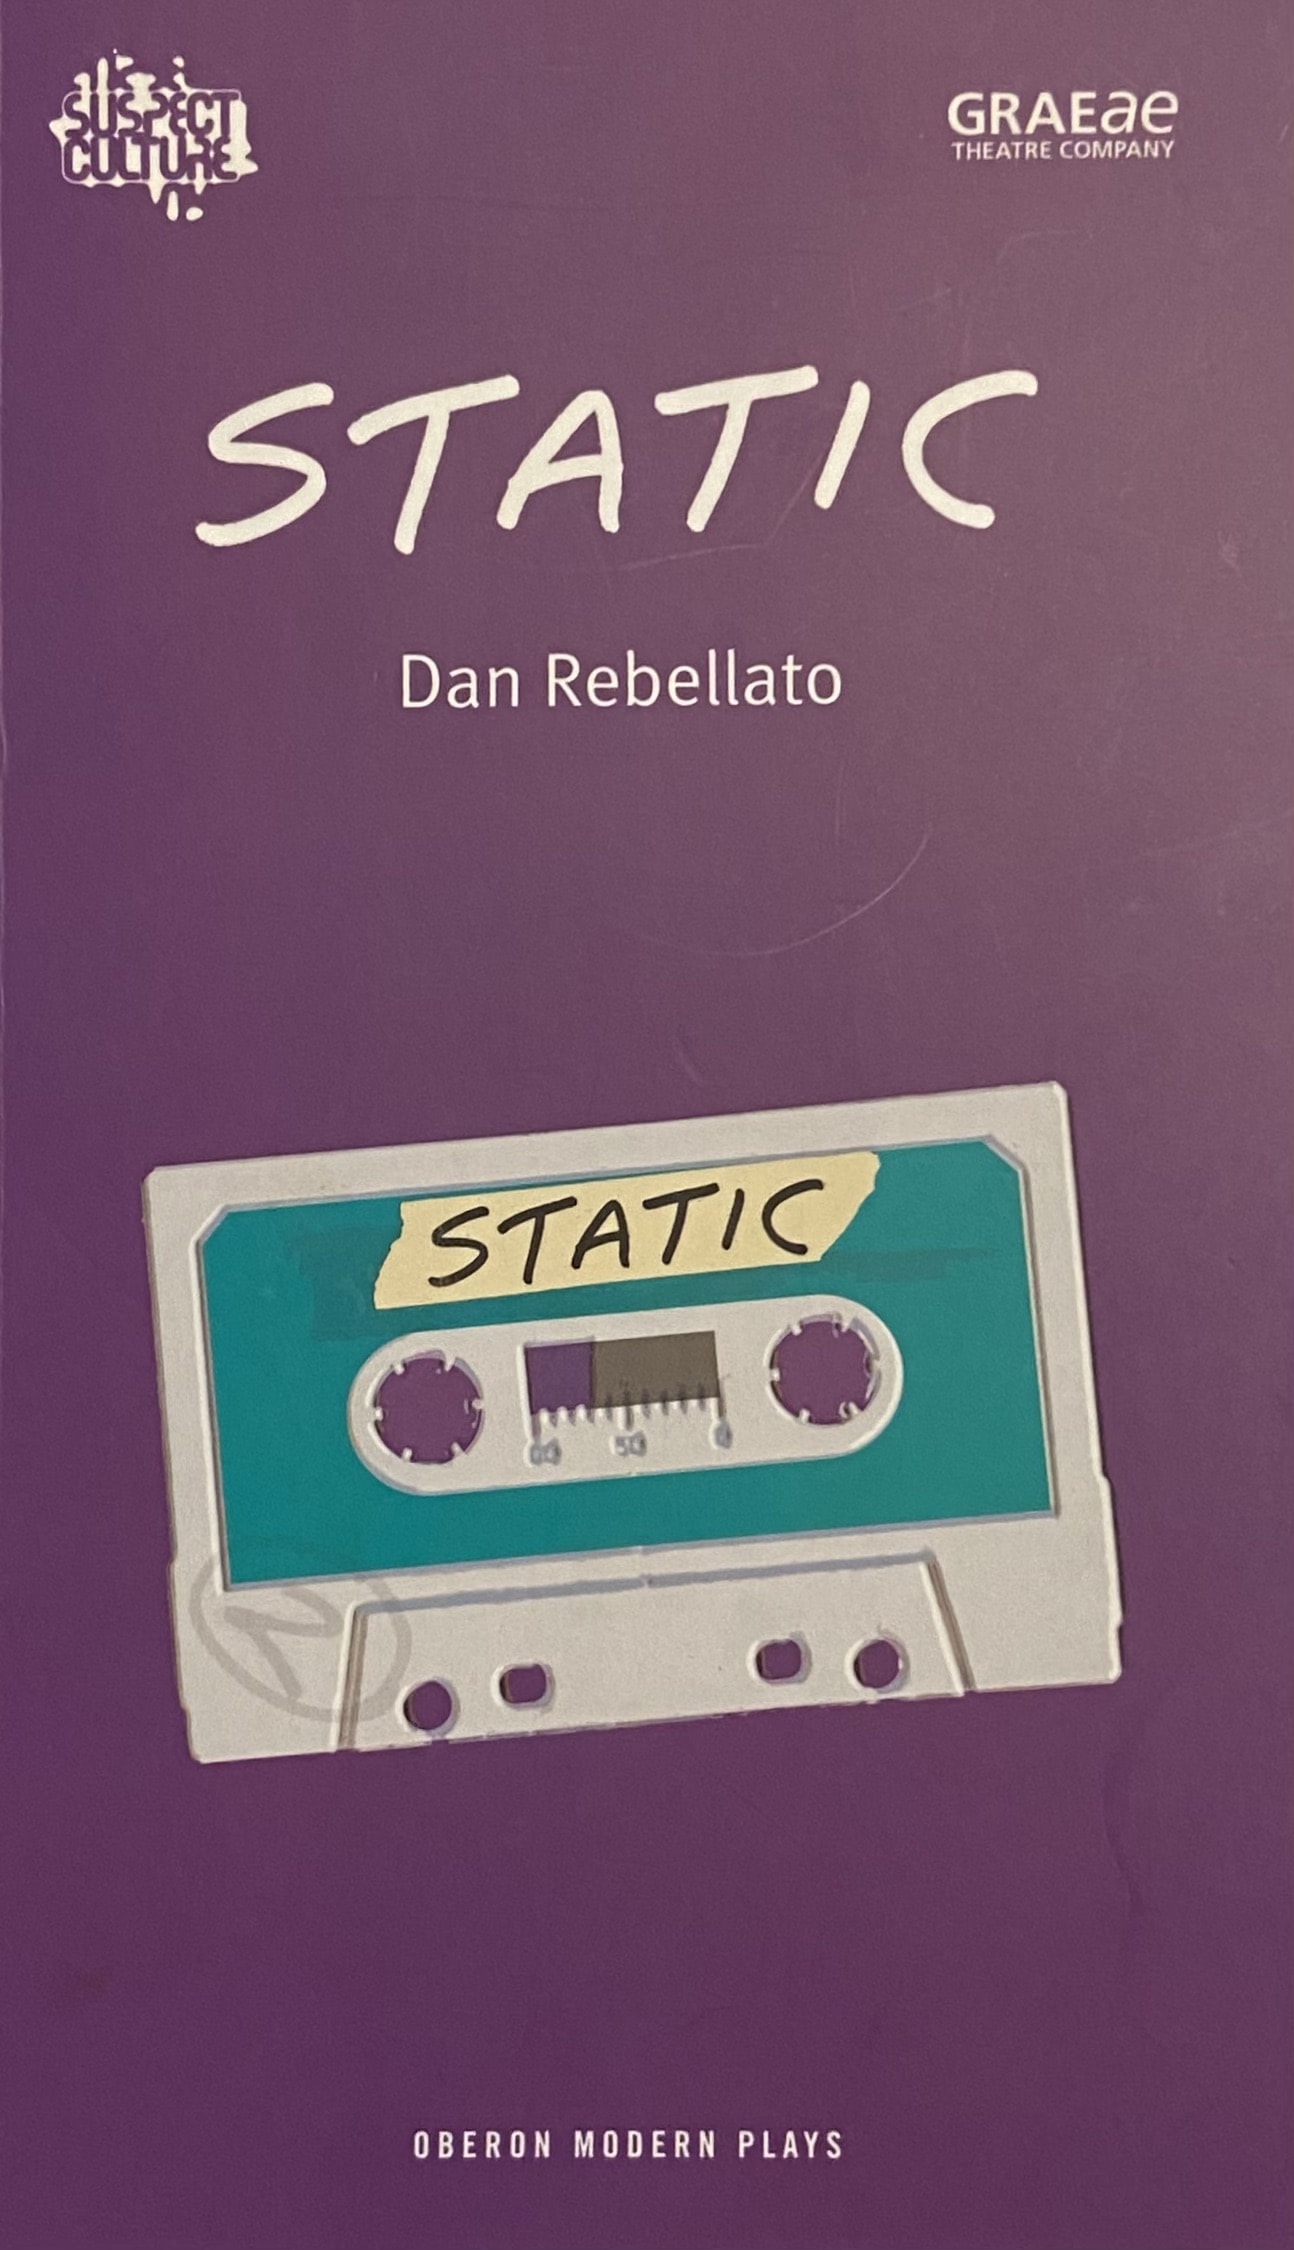 Poster for Static. A simple cassette tape is on a purple background.